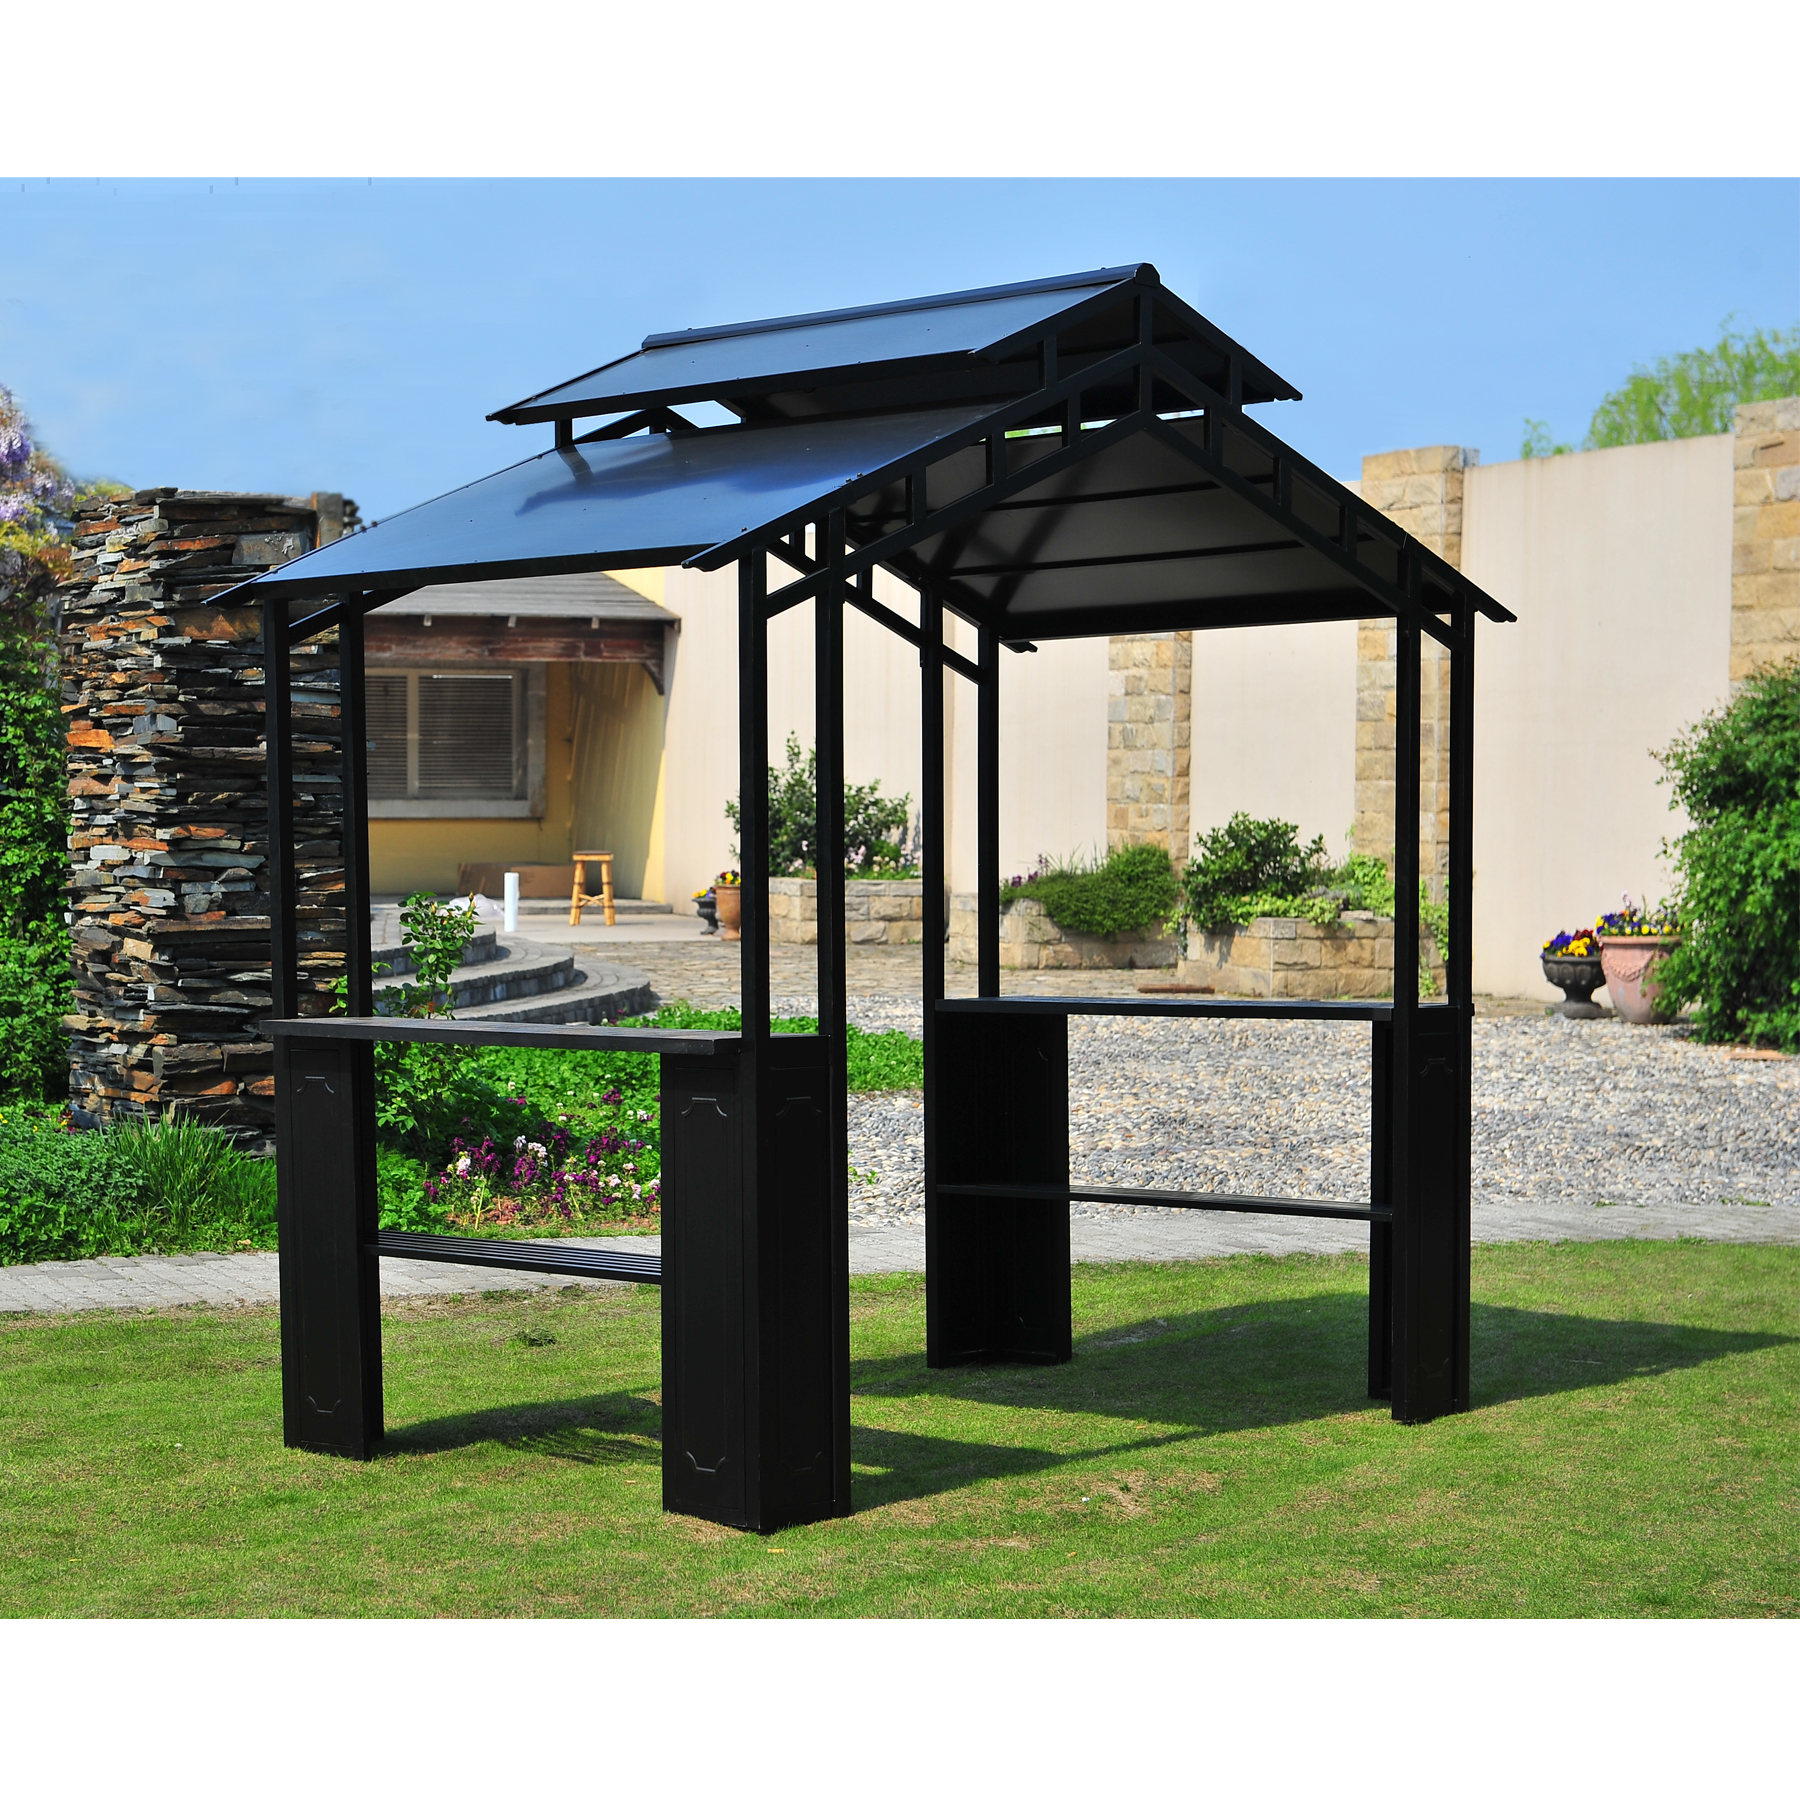 Sunjoy Lincoln Grill gazebo with LED Light